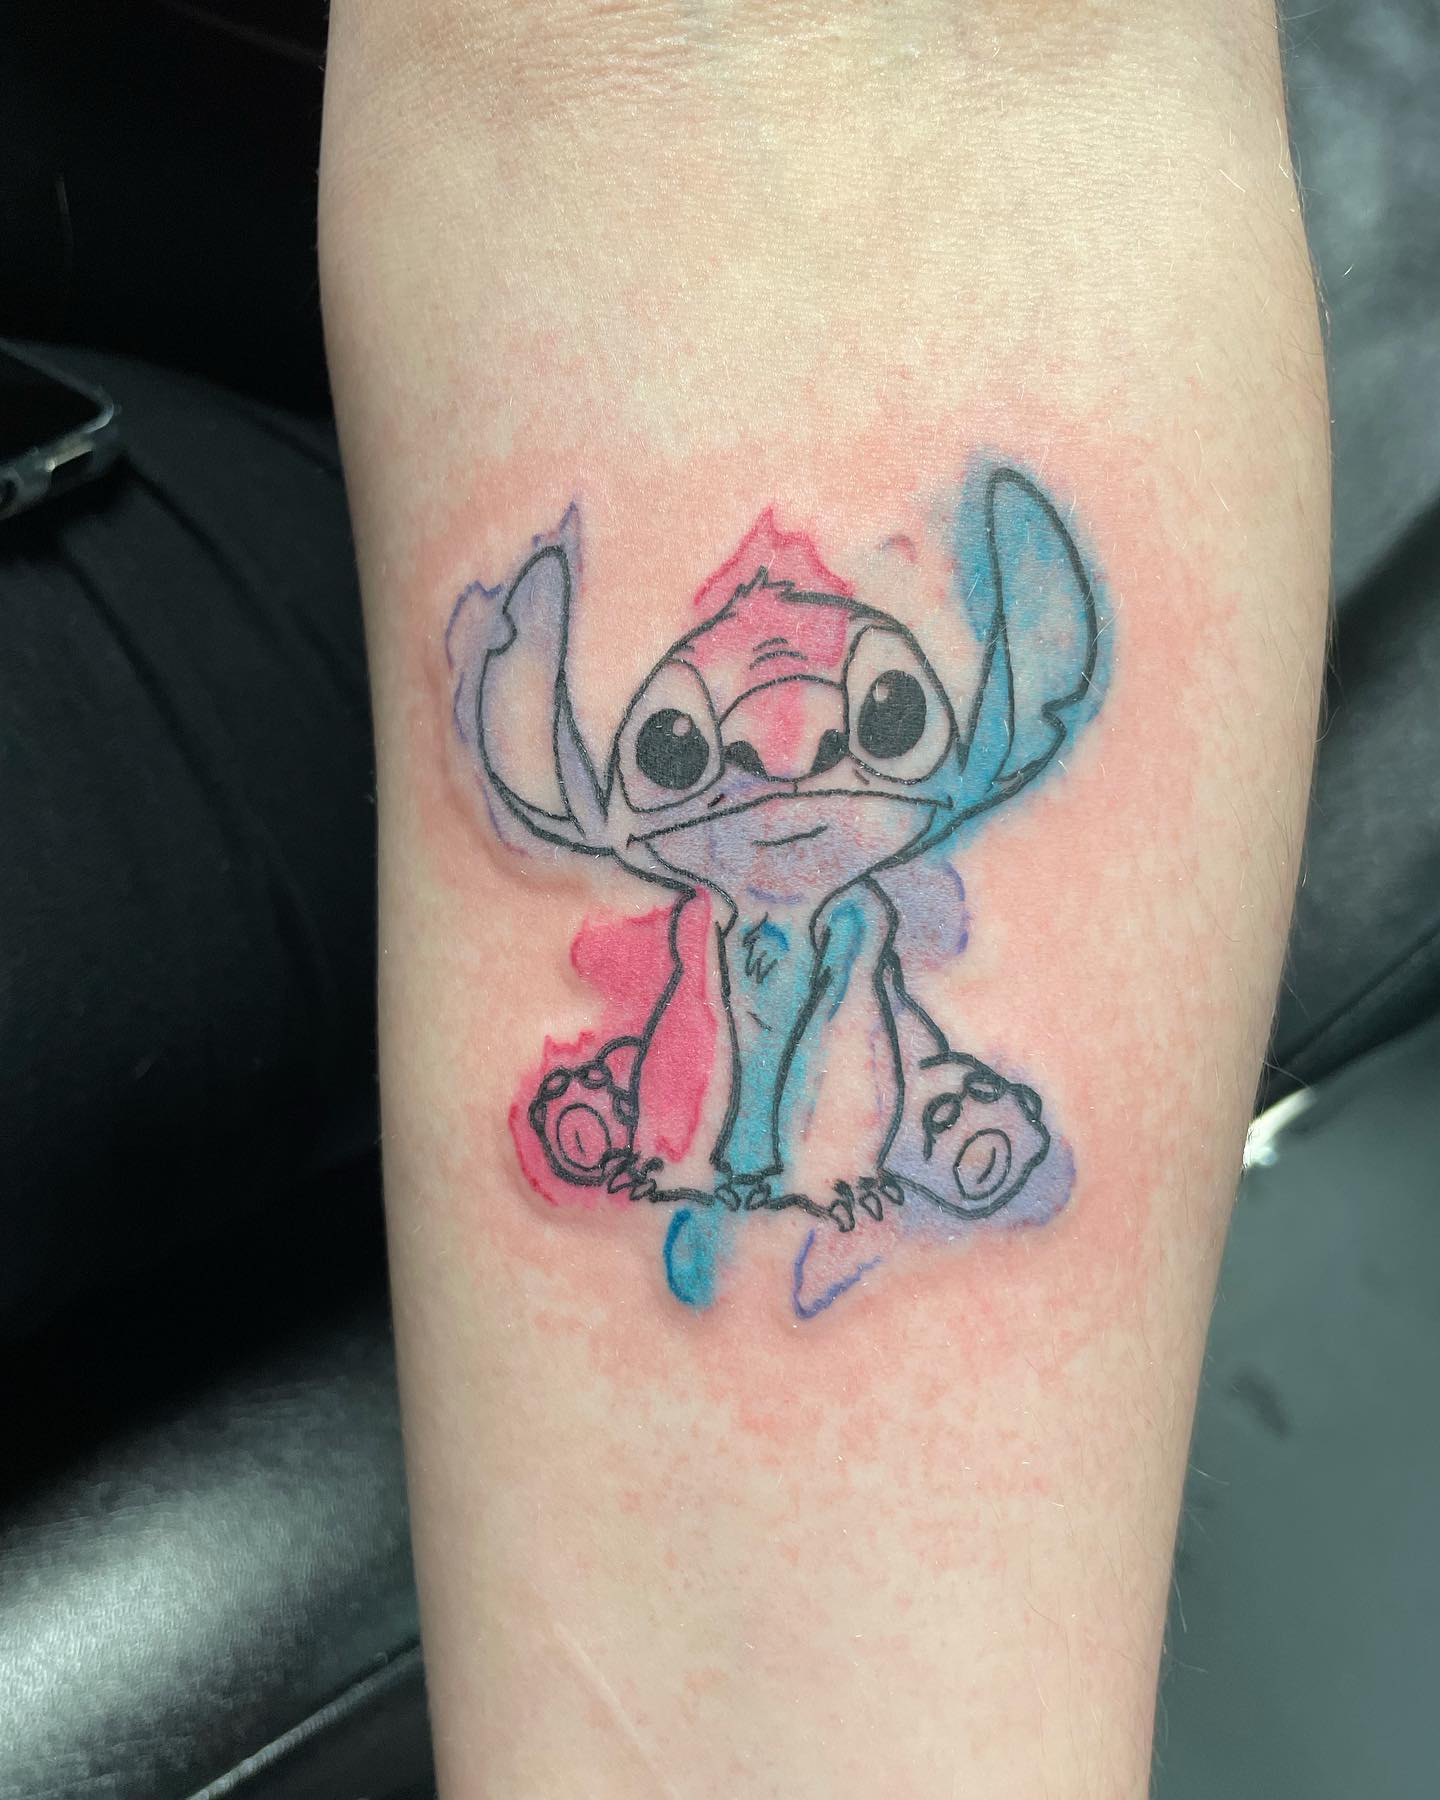 Hart  Huntington Tattoo Orlando  Awesome mickeymouse watercolor  semicolontattoo from adamnatonioink Hit the link in our bio to book your  appointment with Adam today   Facebook